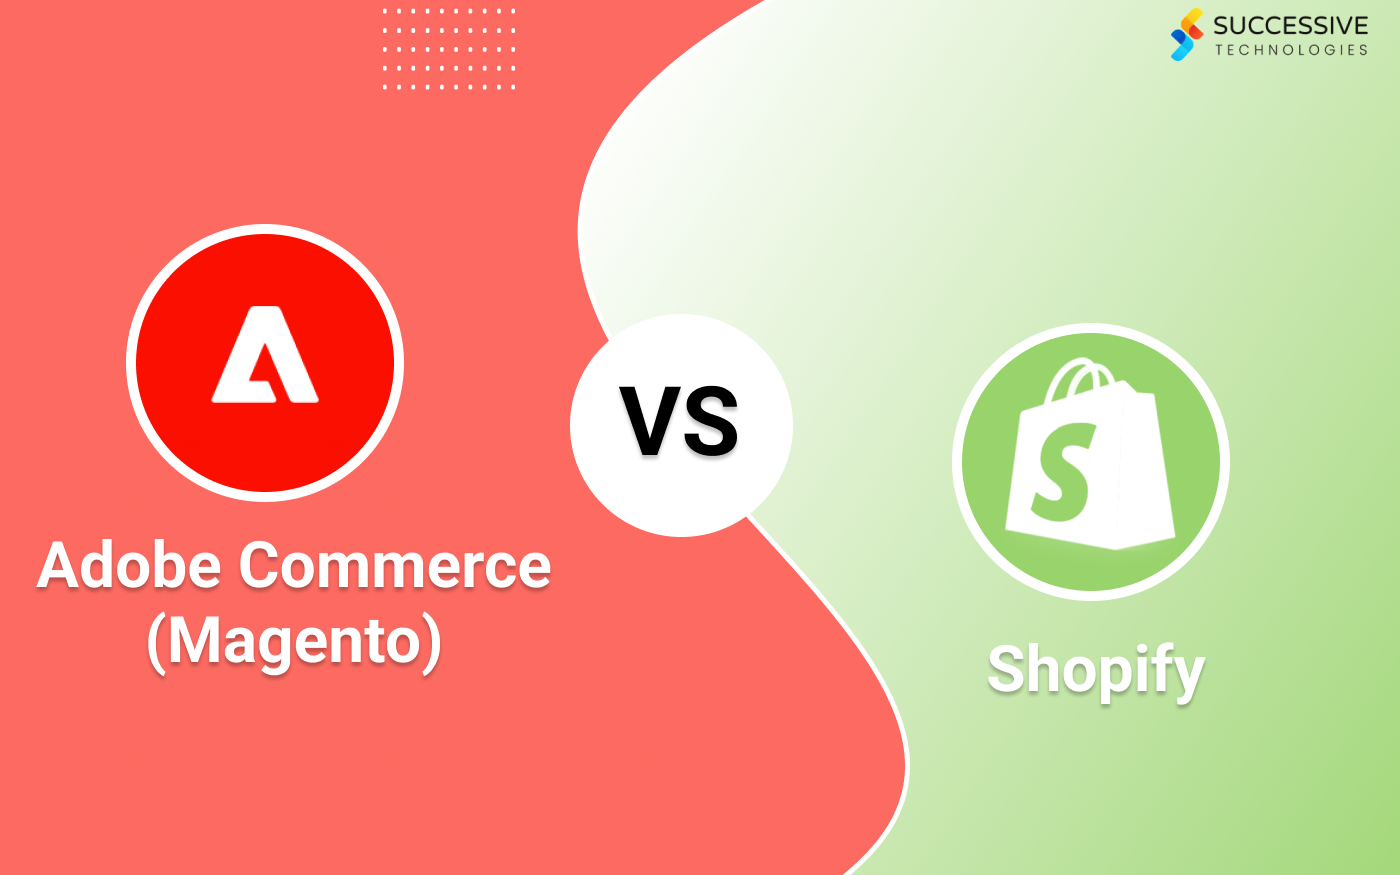 Adobe Commerce (Magento) vs Shopify: Which eCommerce Platform Is Best?